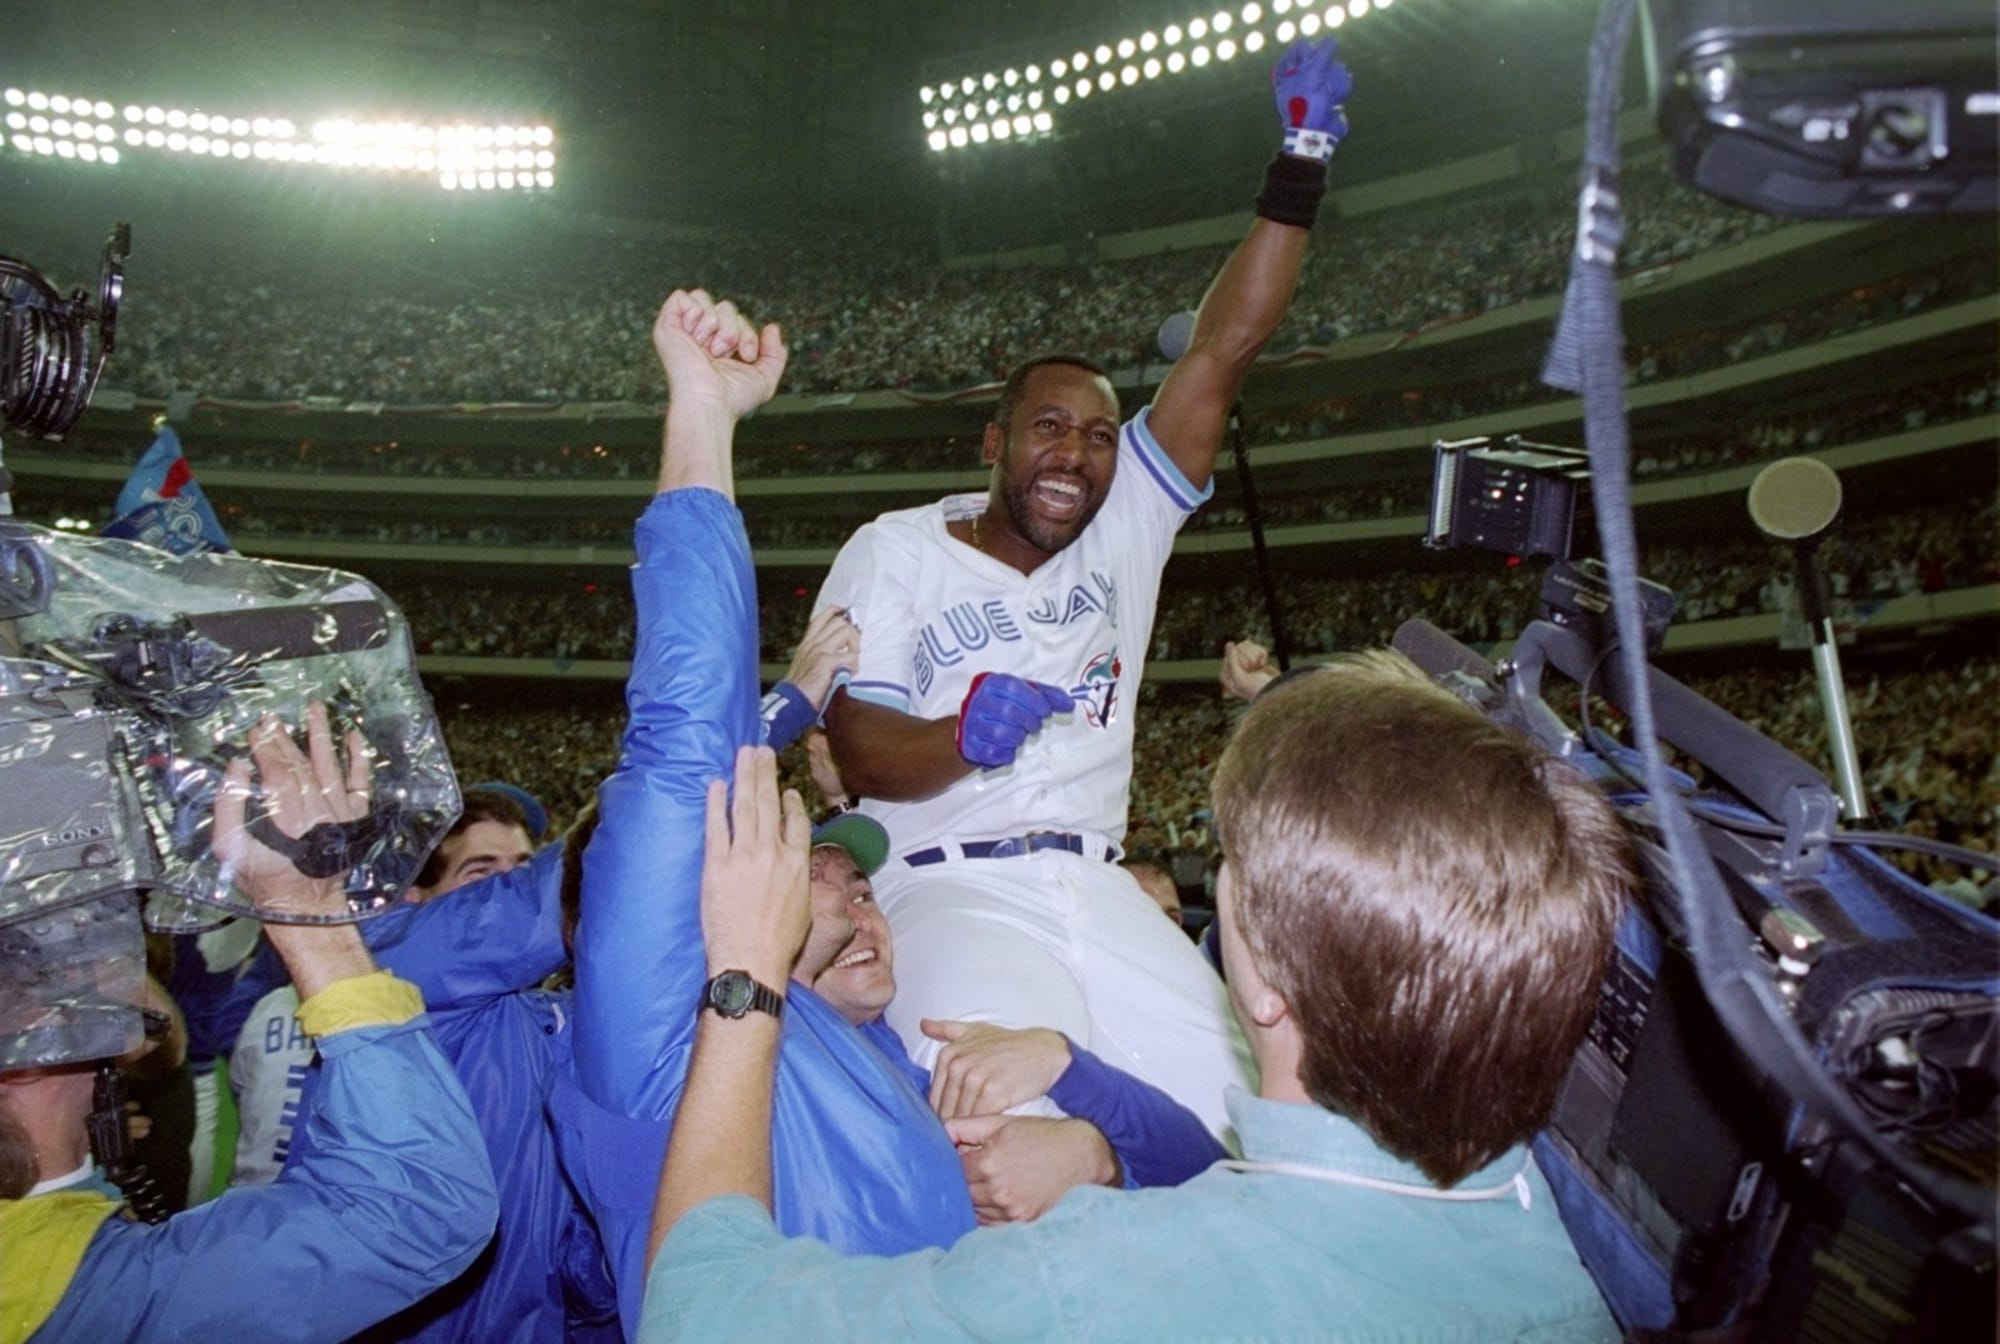 Toronto Blue Jays: Joe Carter unlikely to be voted into the Hall